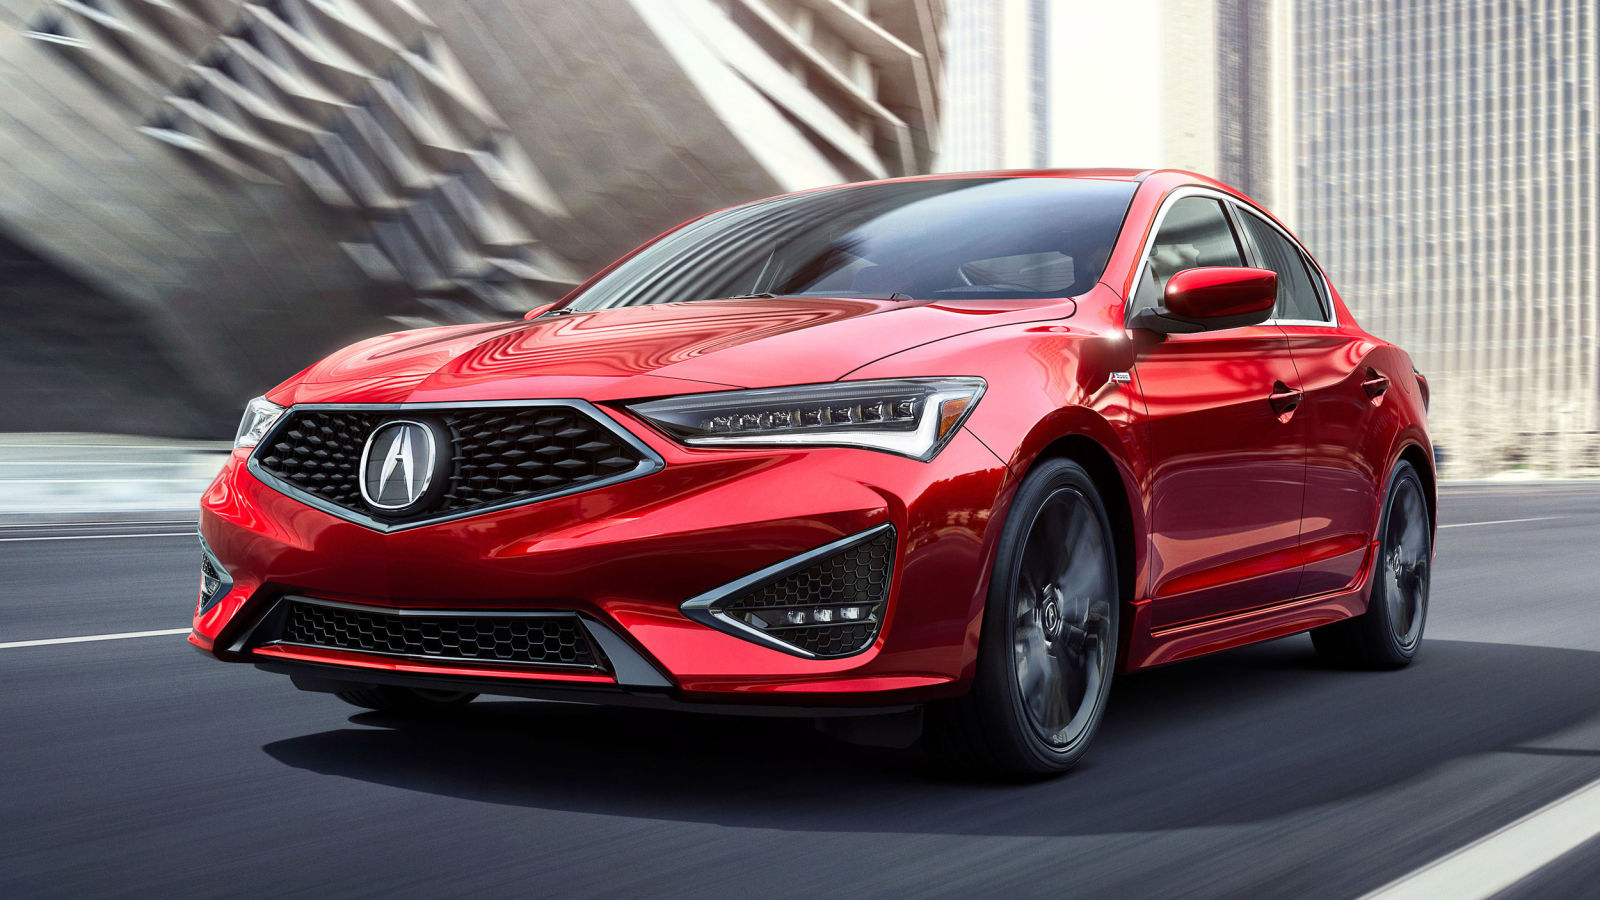 Illustration for article titled Shockingly, there is a 2019 Acura ILX, and its still the same old previous-generation Civic, but now it has a Superman grille